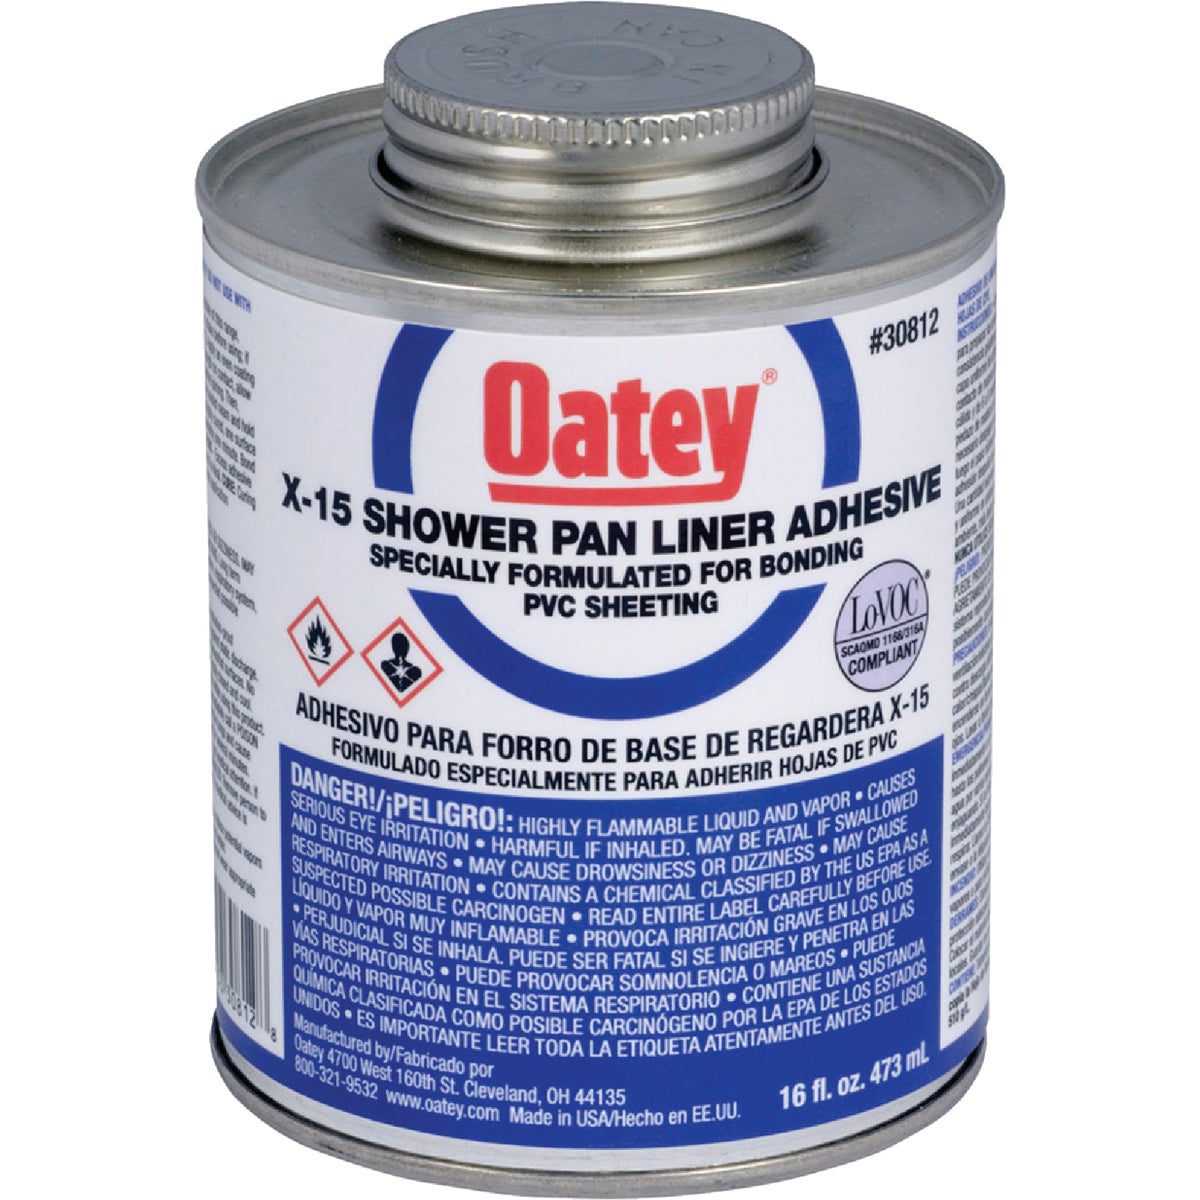 Oatey 16 Oz. X-15 Shower Pan Liner Adhesive PVC Cement